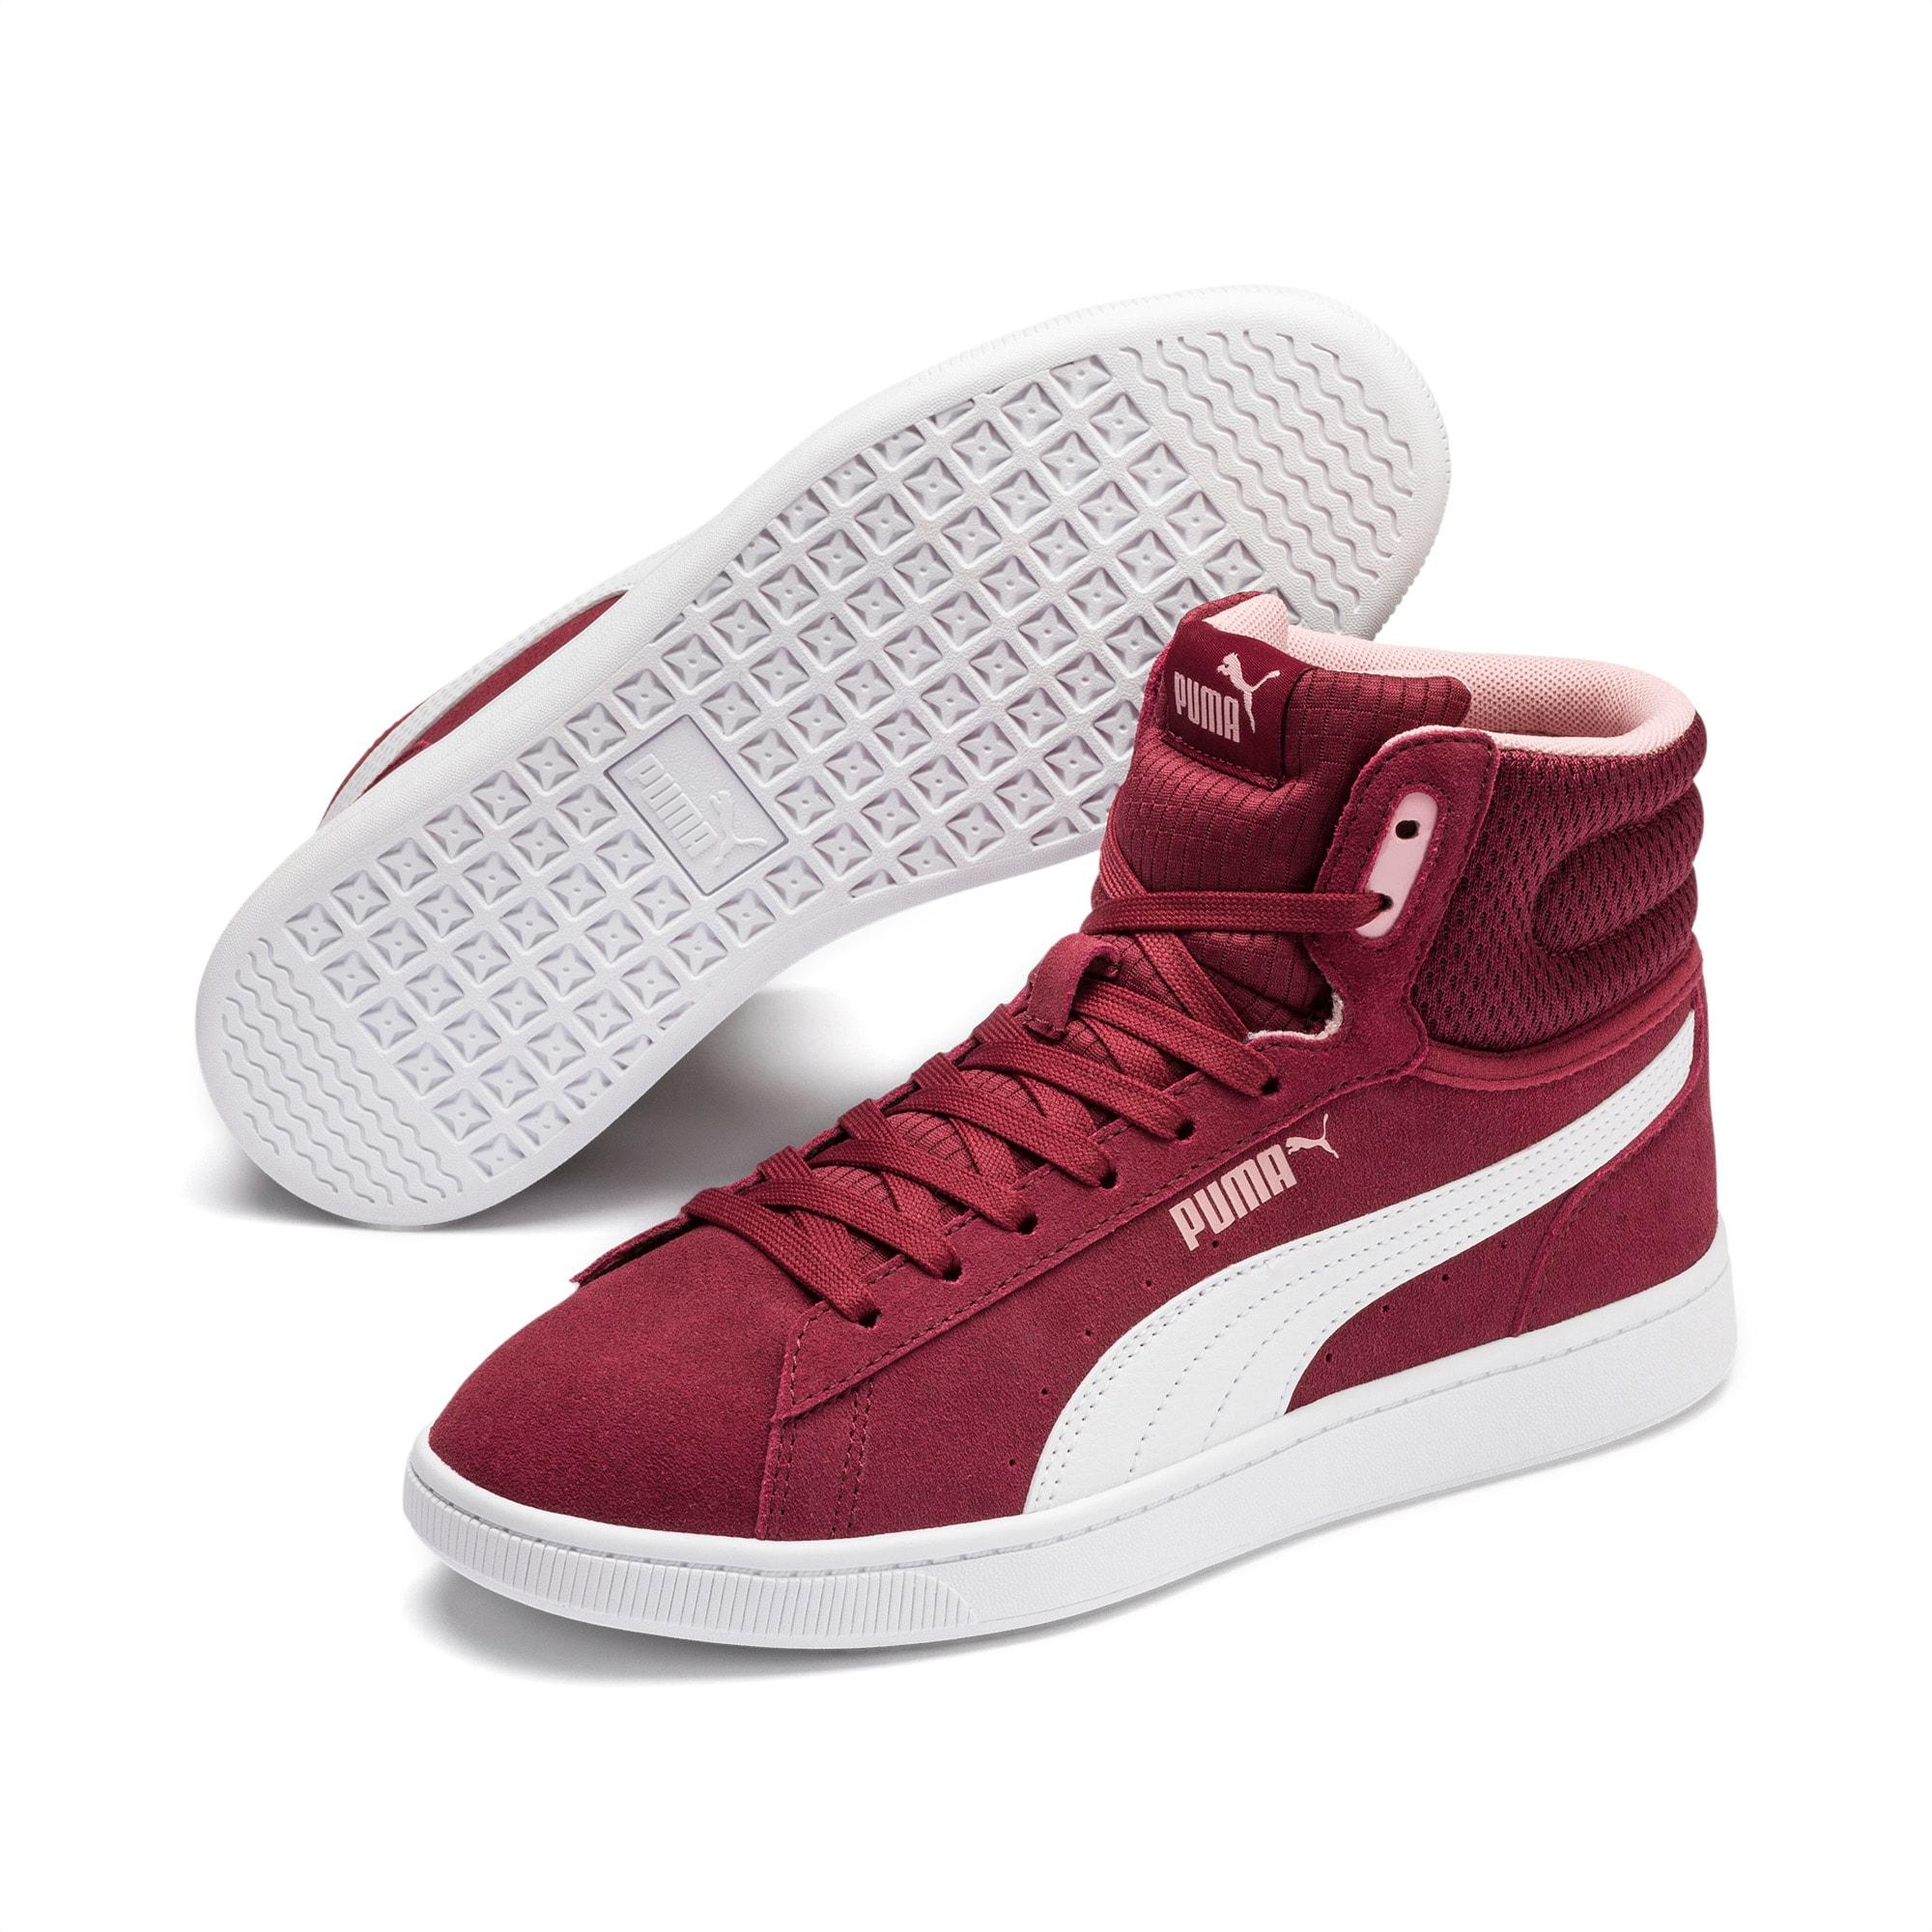 PUMA Suede Vikky V2 Mid Women's Sneakers - Lyst